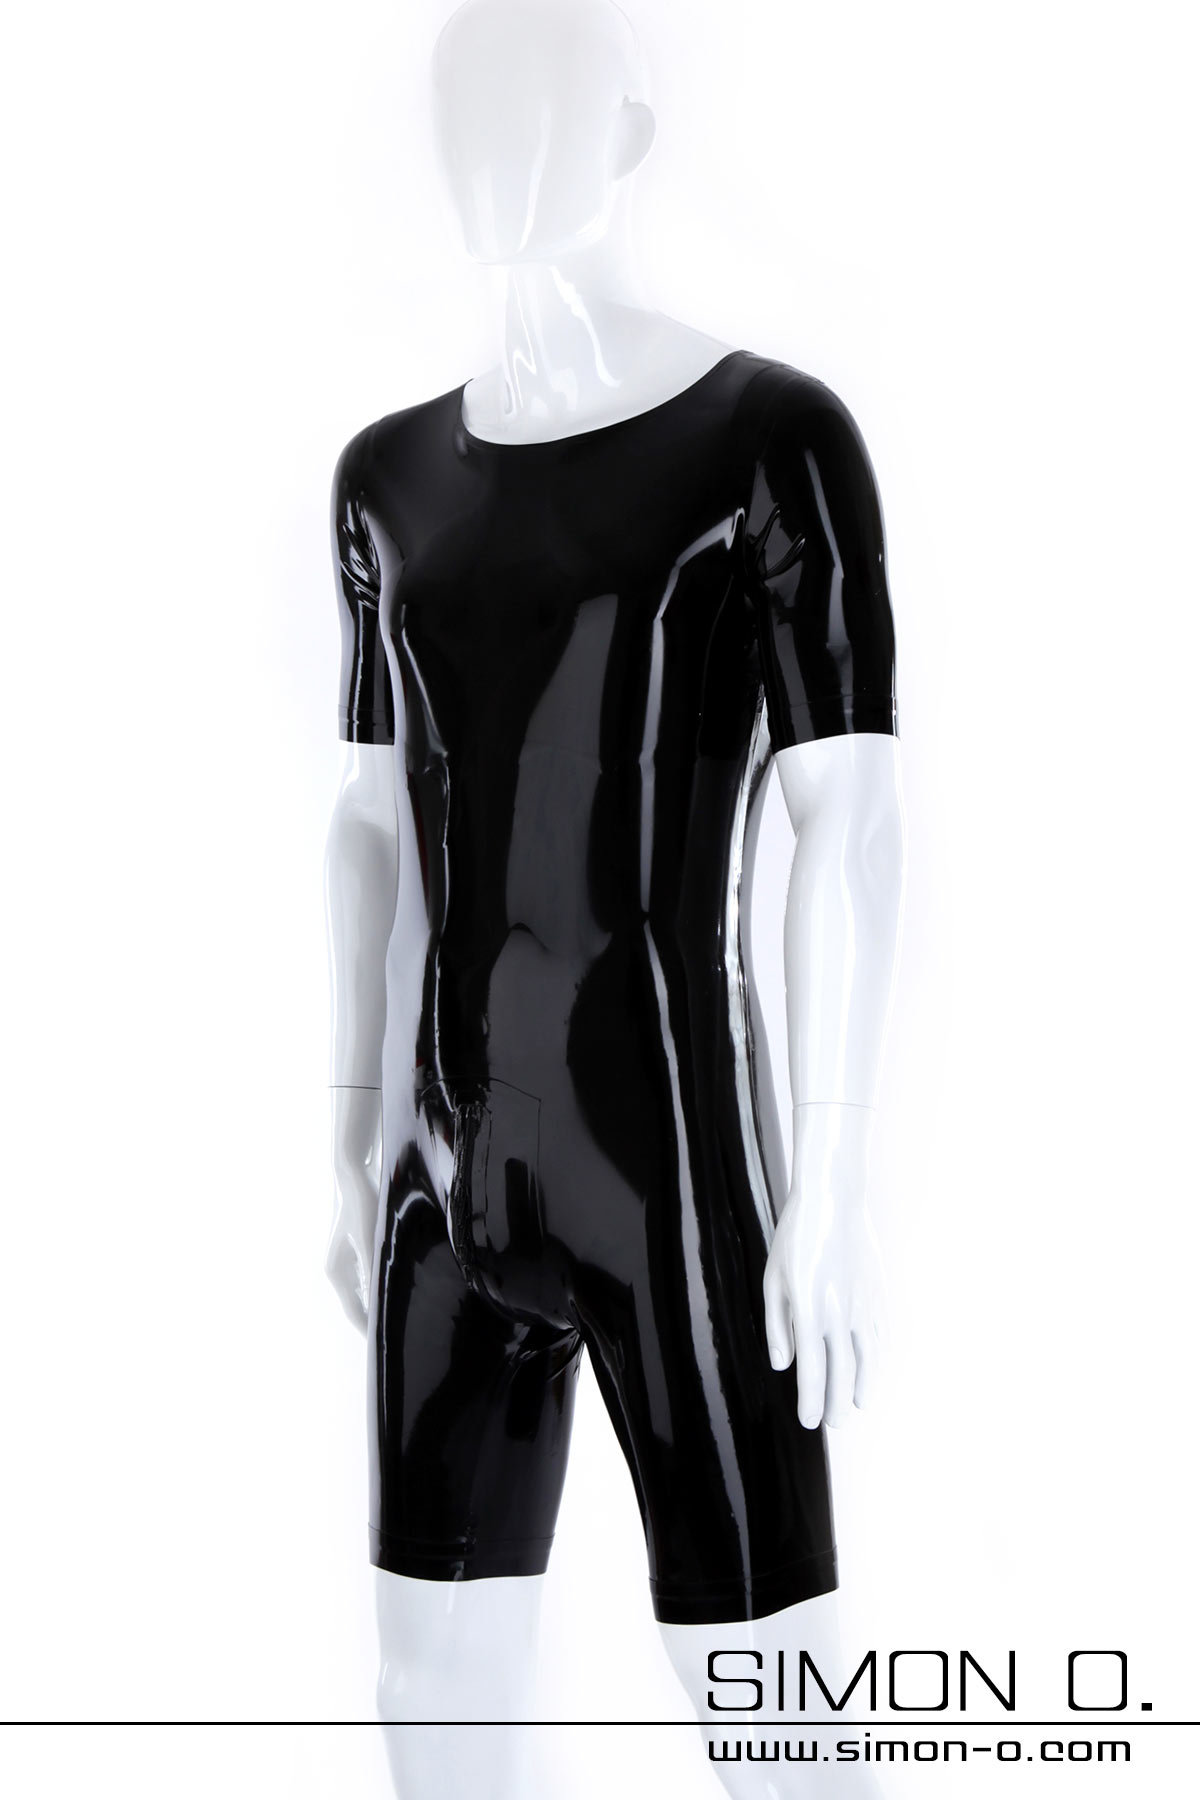 Black skintight latex body with round neckline and zipper in the crotch seen from behind